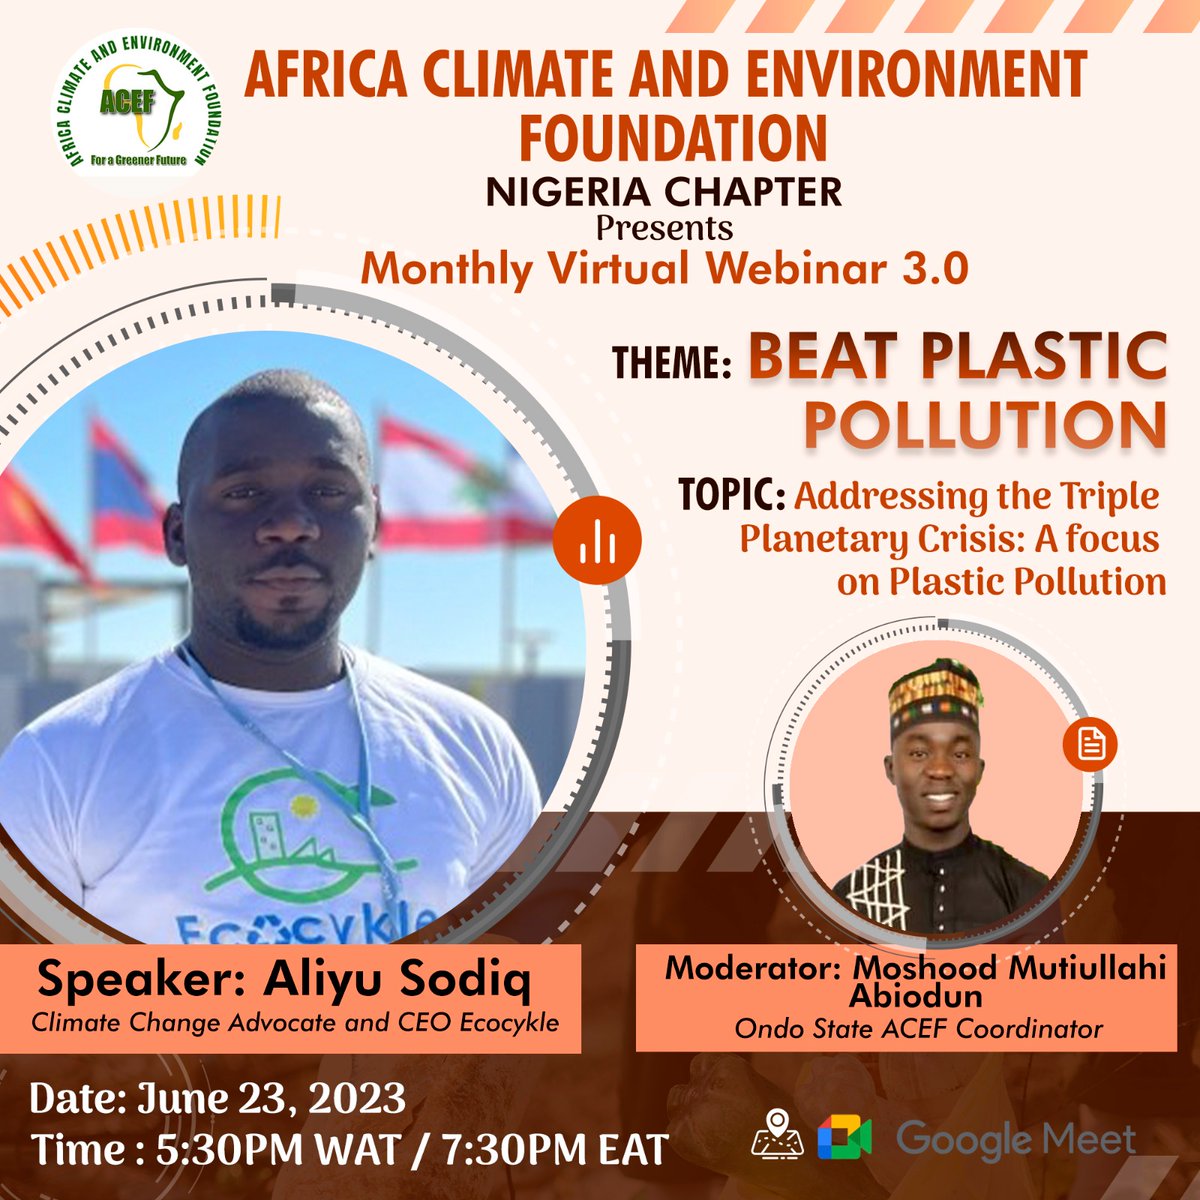 @ACEFngo is using this medium to invite you all to be a part of an important conversation focused on tackling the Triple Planetary Crisis, with a specific emphasis on Plastic Pollution.   

Join us for an engaging and insightful discussion today.
Link: meet.google.com/vdi-ahix-kwy